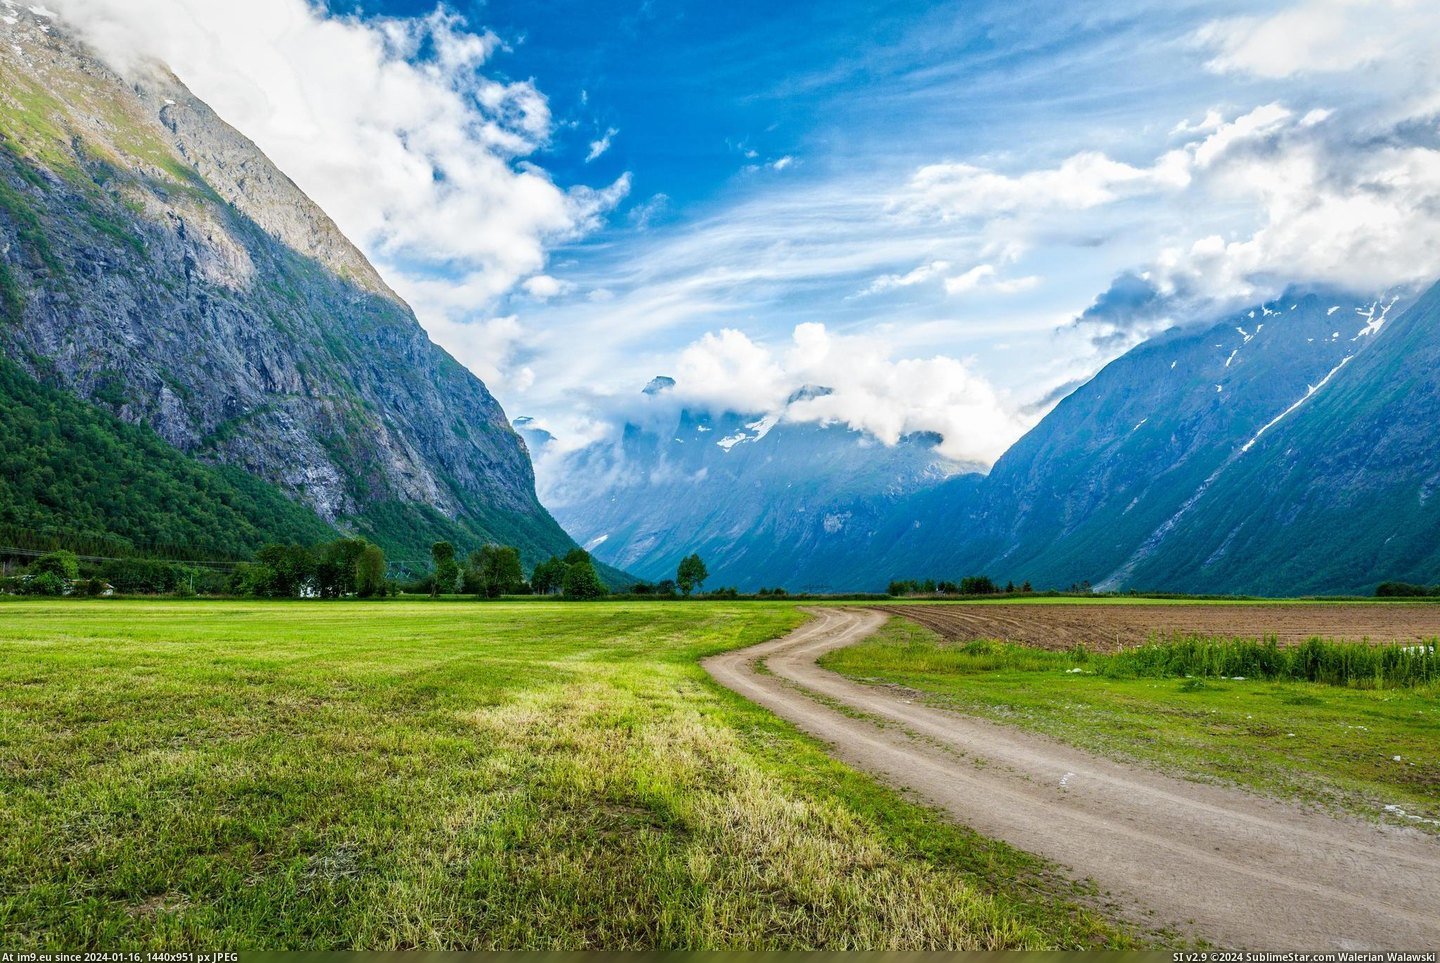 #Road #Simple #Norway [Pics] A simple road in Norway Pic. (Image of album My r/PICS favs))